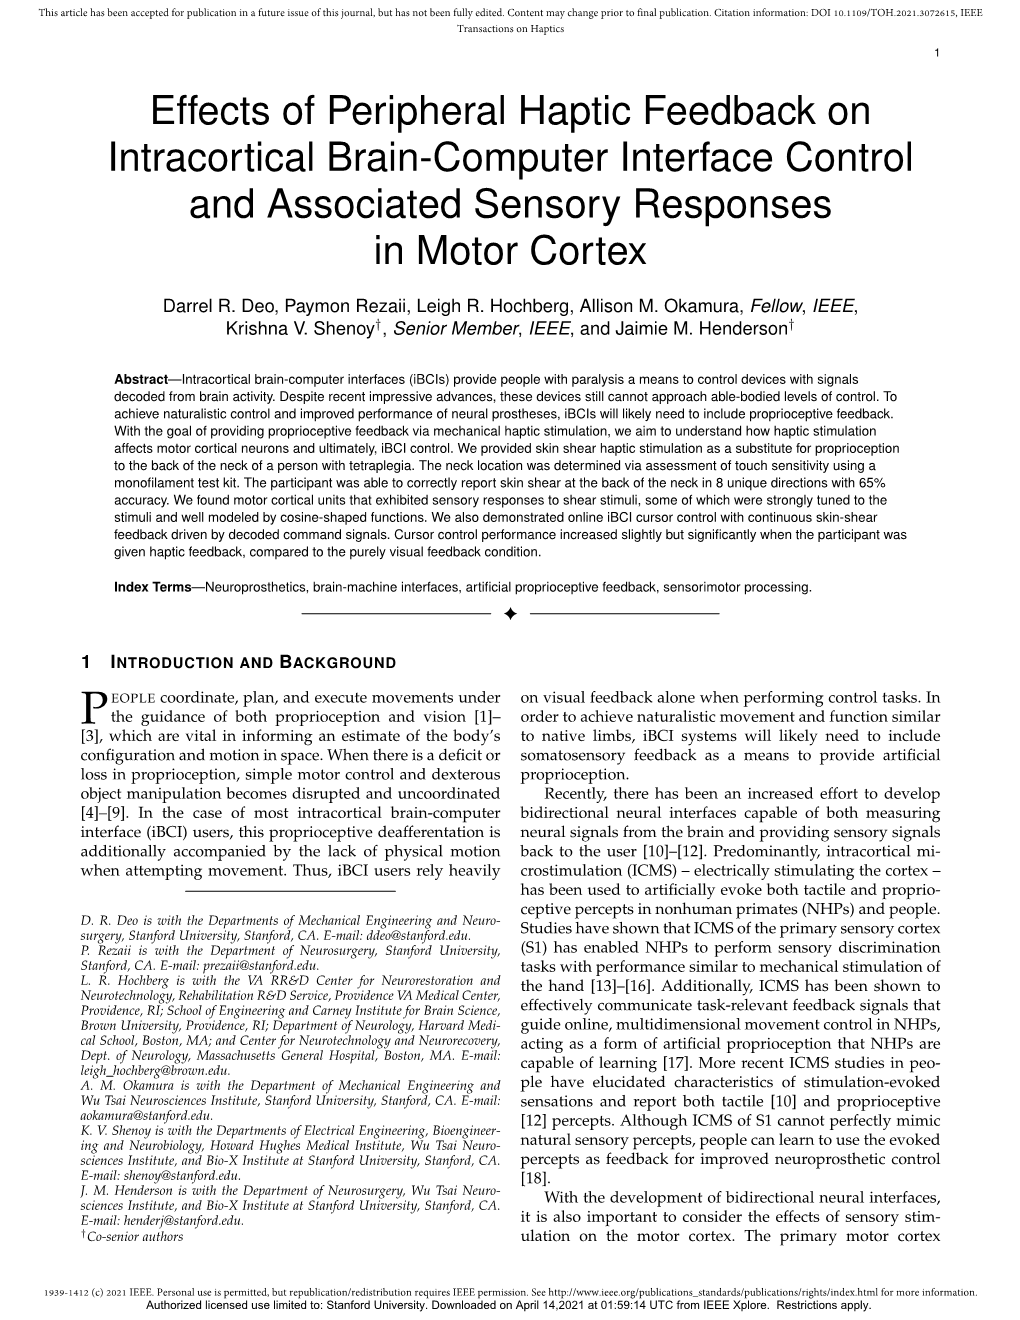 Effects of Peripheral Haptic Feedback on Intracortical Brain-Computer Interface Control and Associated Sensory Responses in Motor Cortex